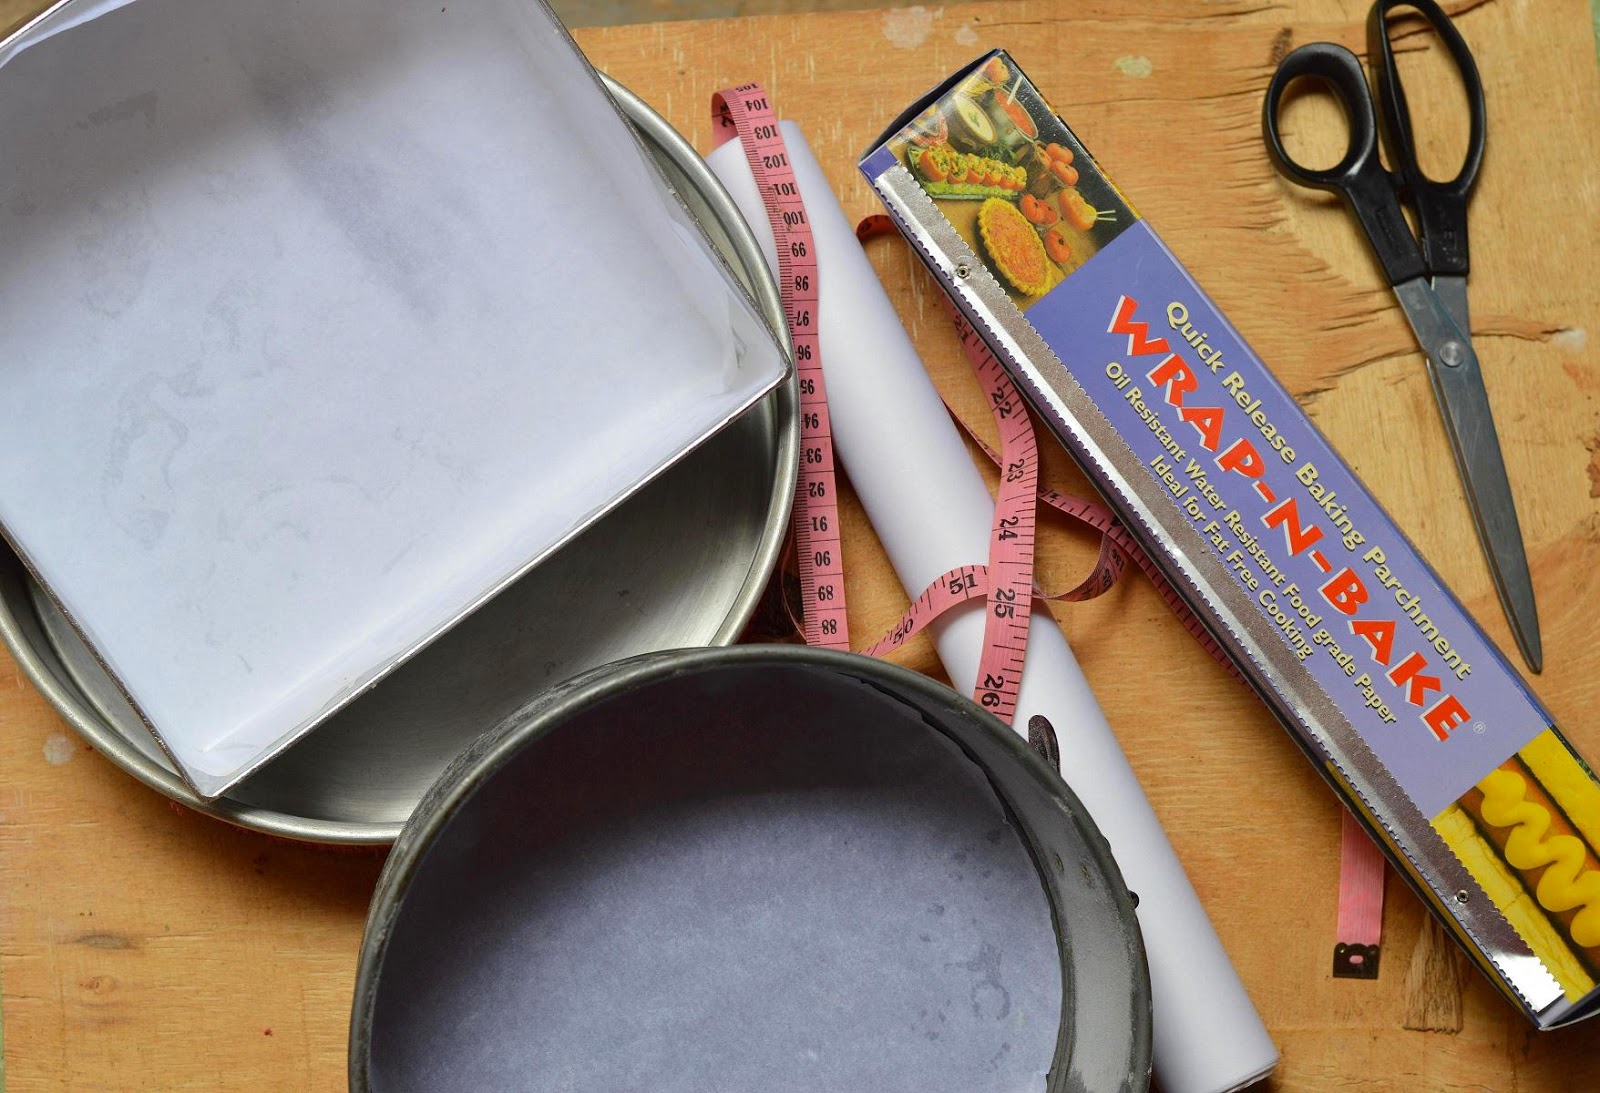 Beginner's guide to baking pans and tins - Bake with Shivesh